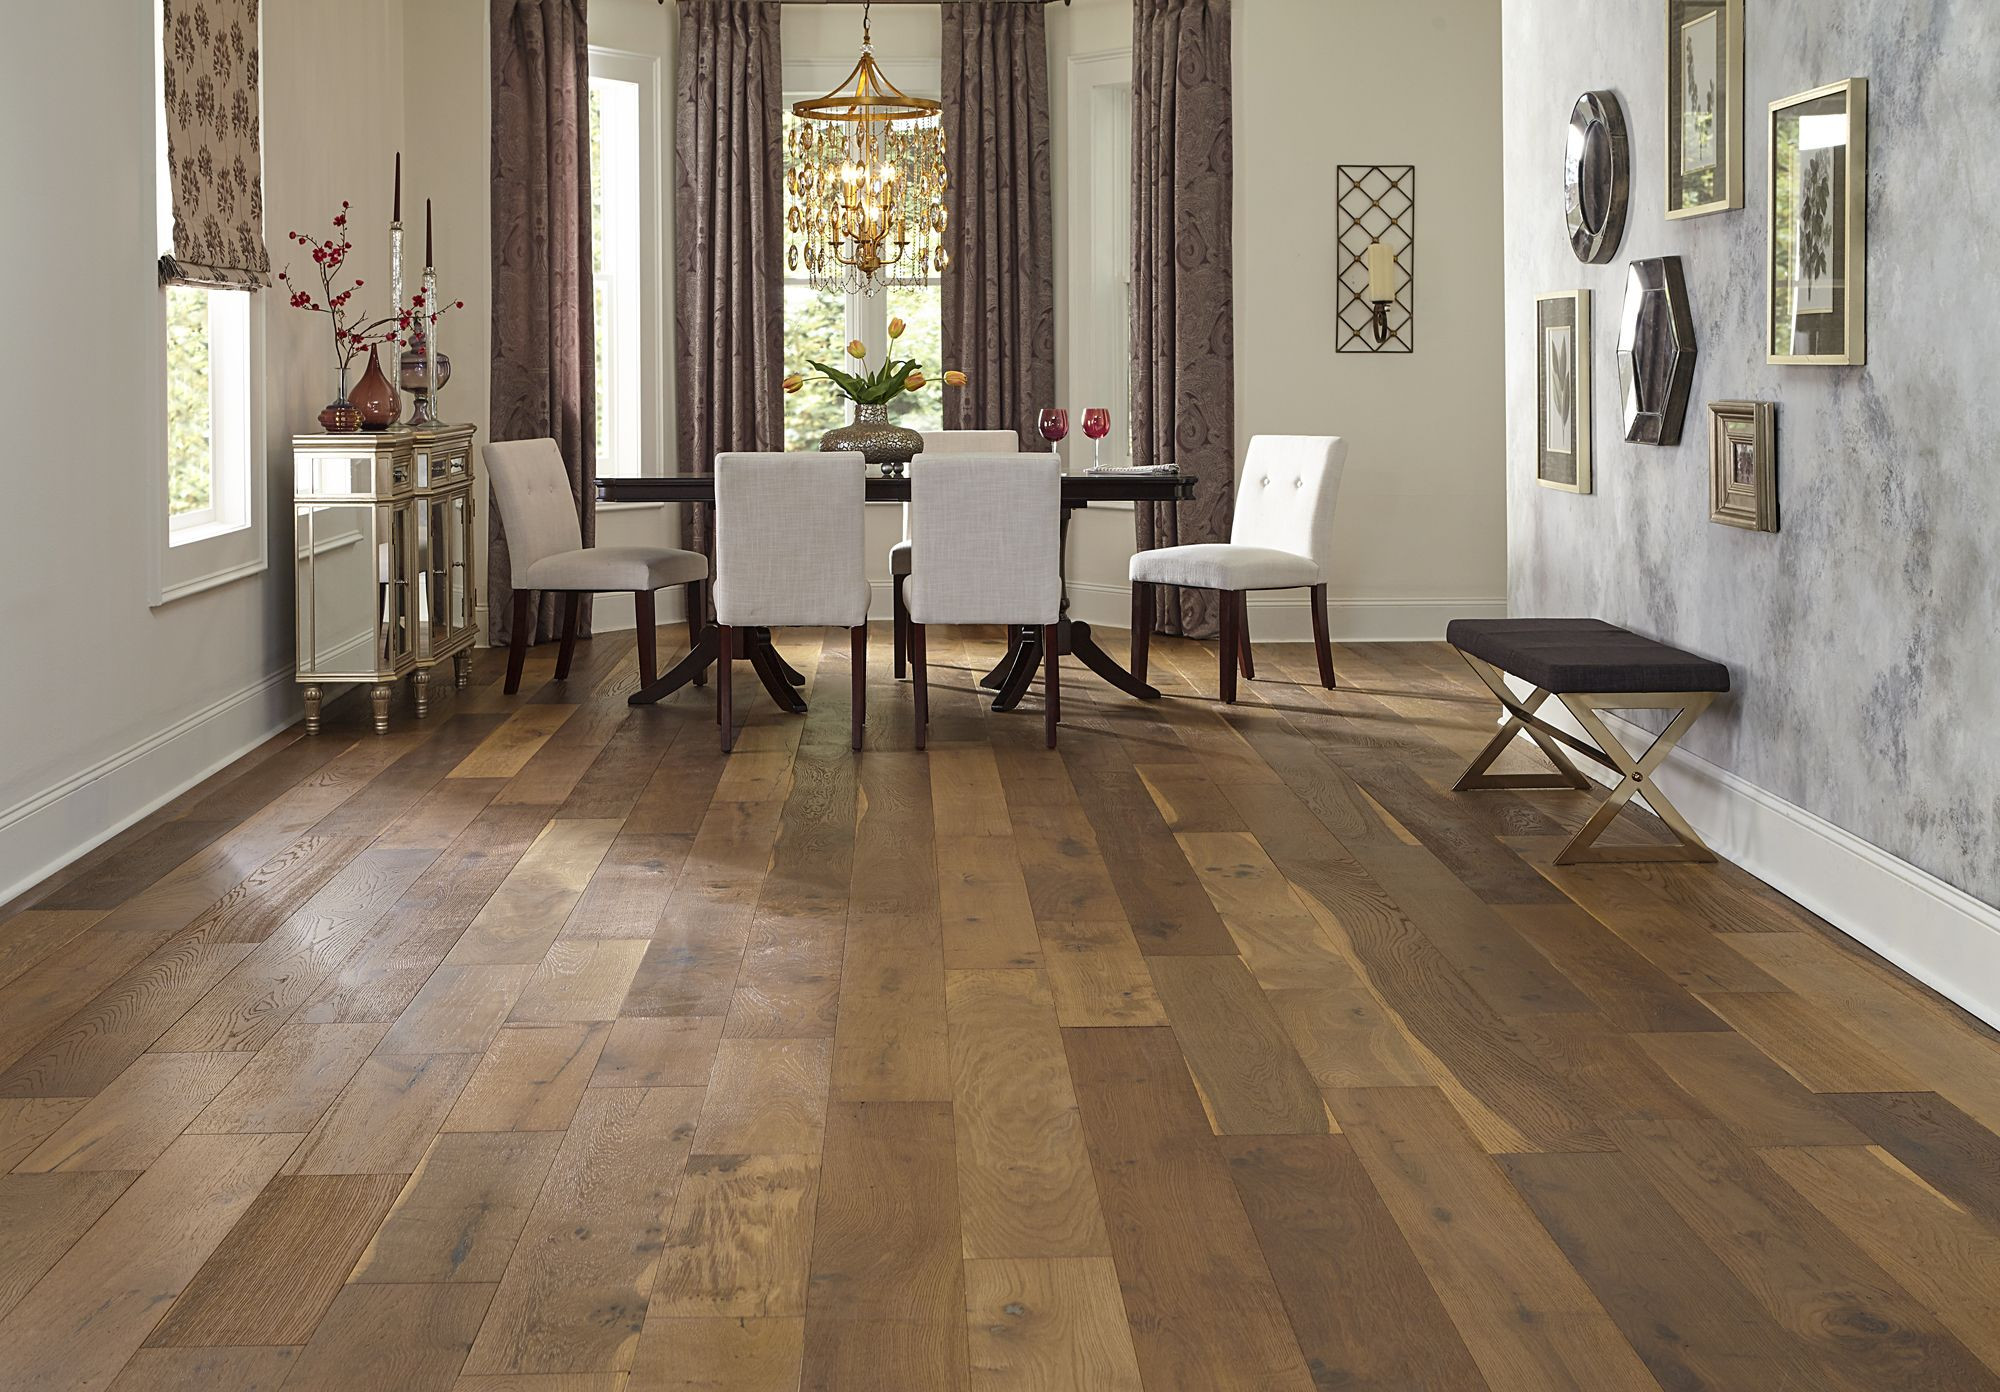 10 Elegant Unfinished Hardwood Flooring Nashville 2024 free download unfinished hardwood flooring nashville of 7 1 2 wide planks and a rustic look bellawood willow manor oak has within 7 1 2 wide planks and a rustic look bellawood willow manor oak has a stori